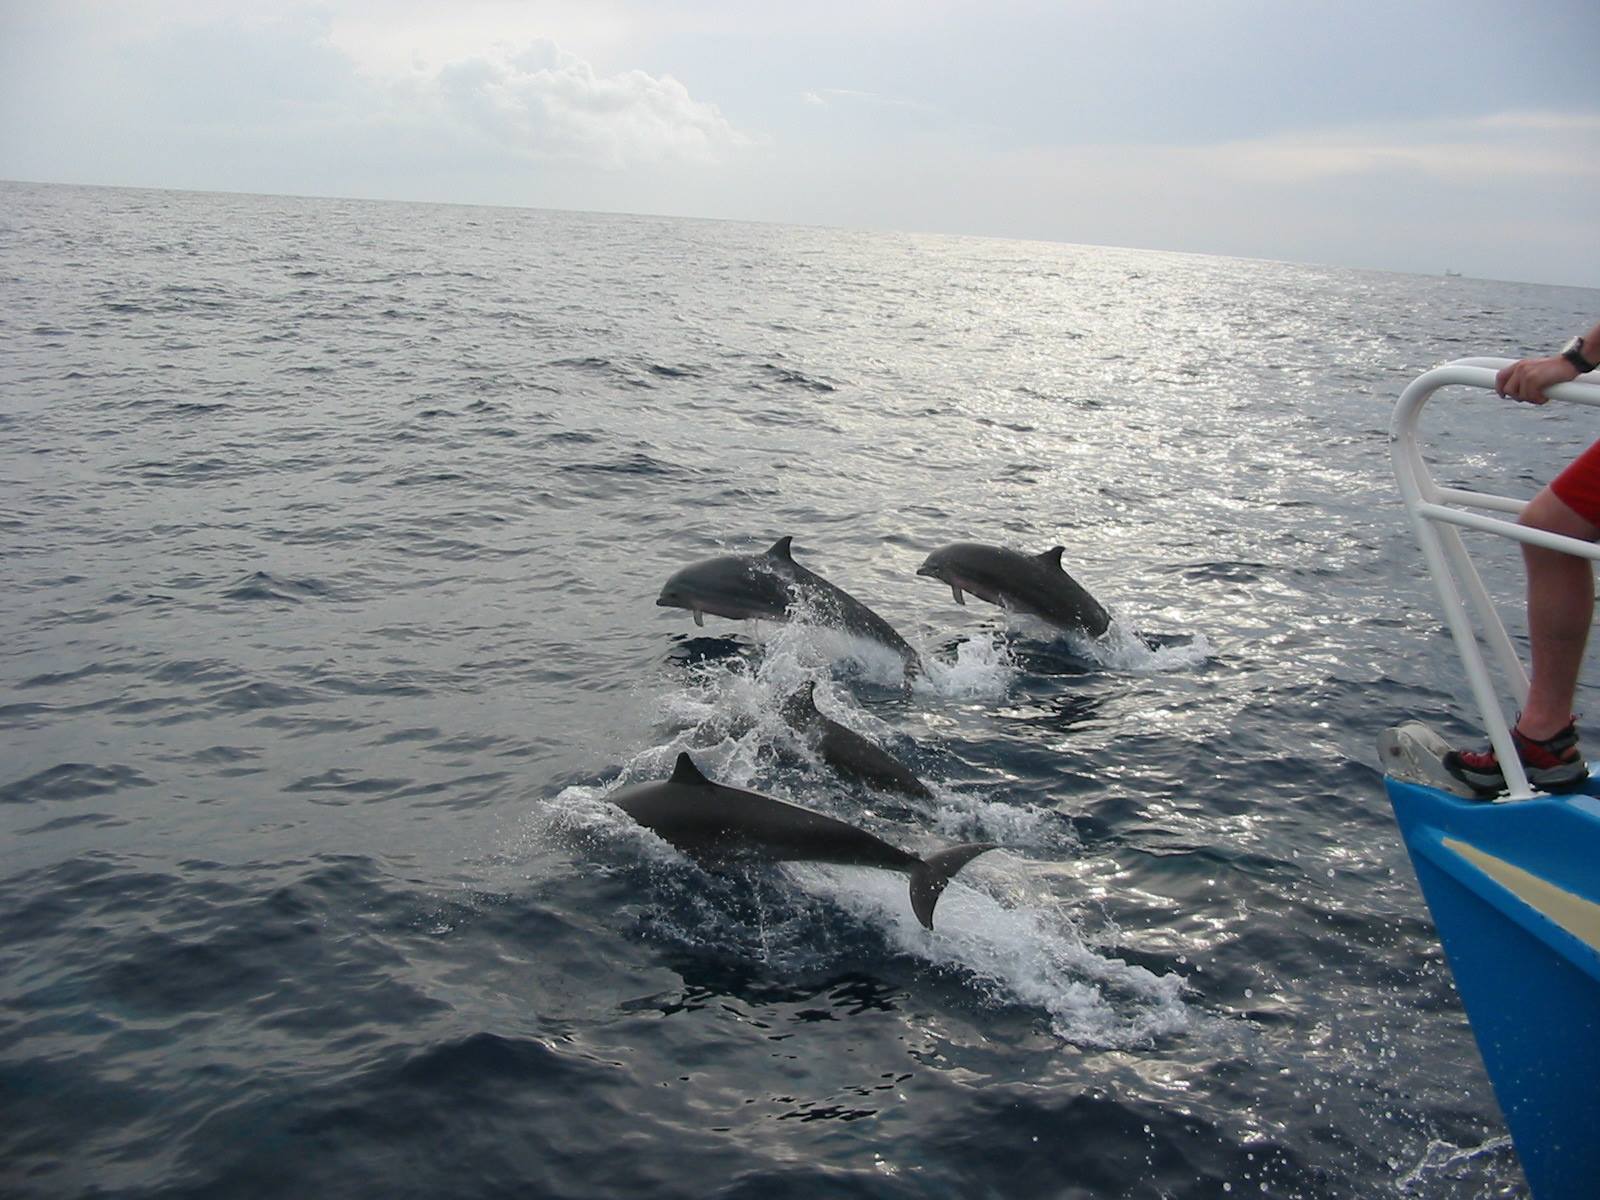 LES HEURES SAINES Offer Healthy Hours - Child and Adult Cetacean Cruise